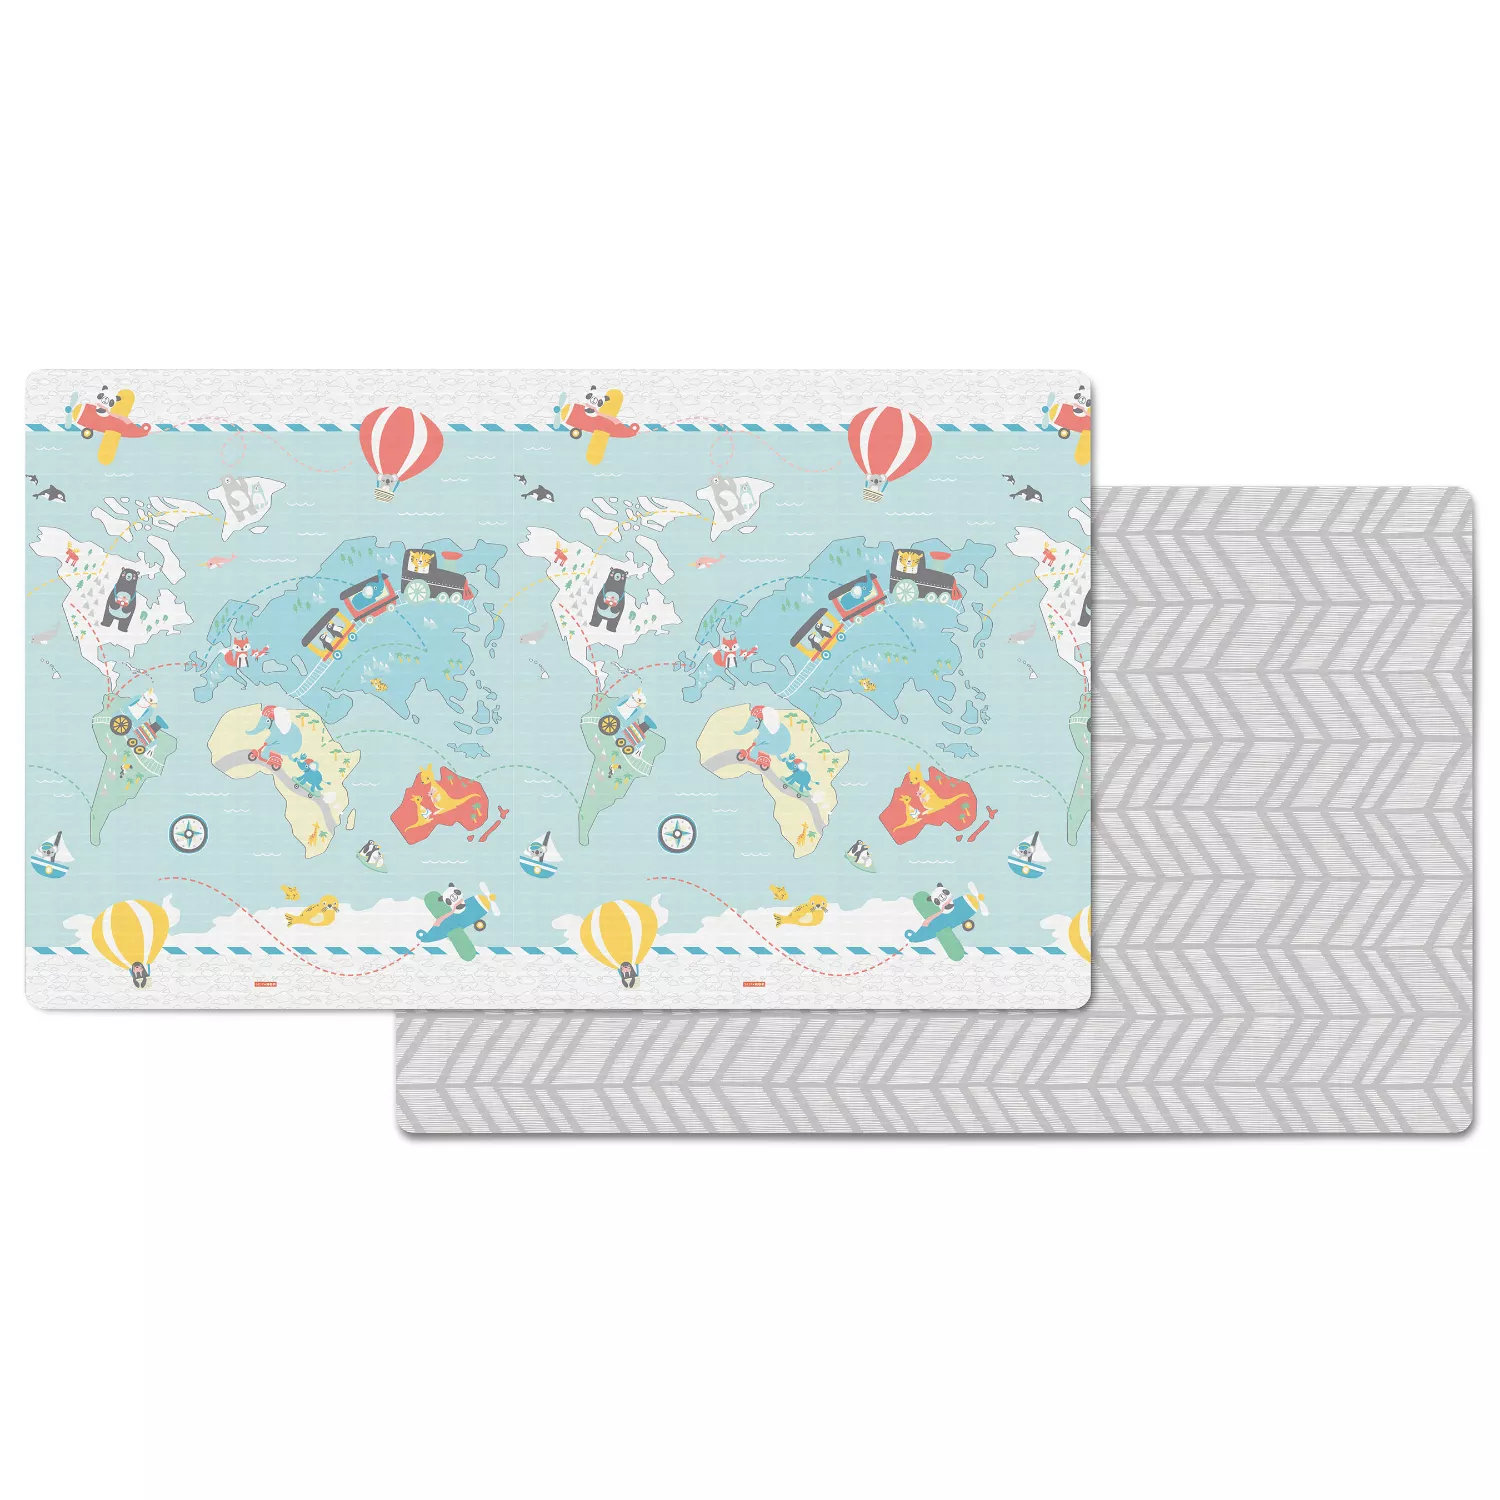 SkipHop Doubleplay Reversible Playmat